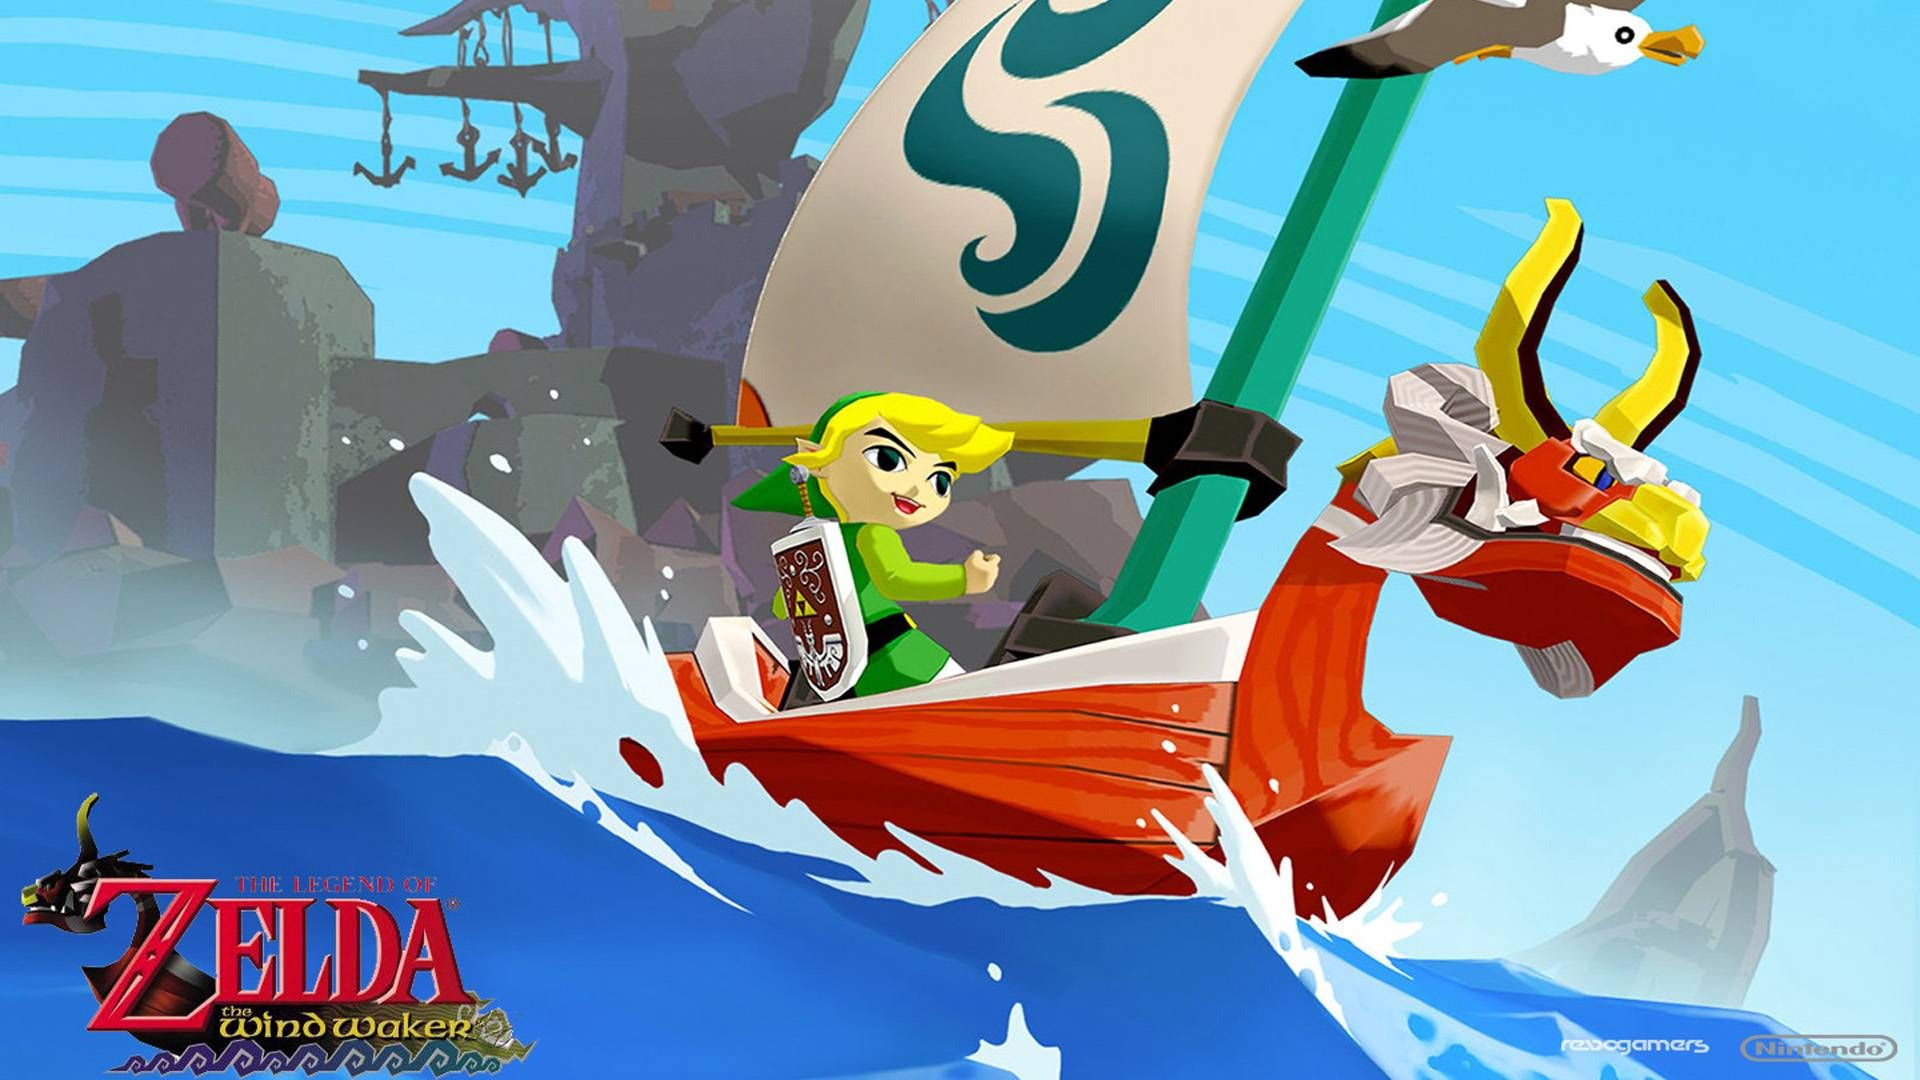 Wind Waker image for article on longest continuity